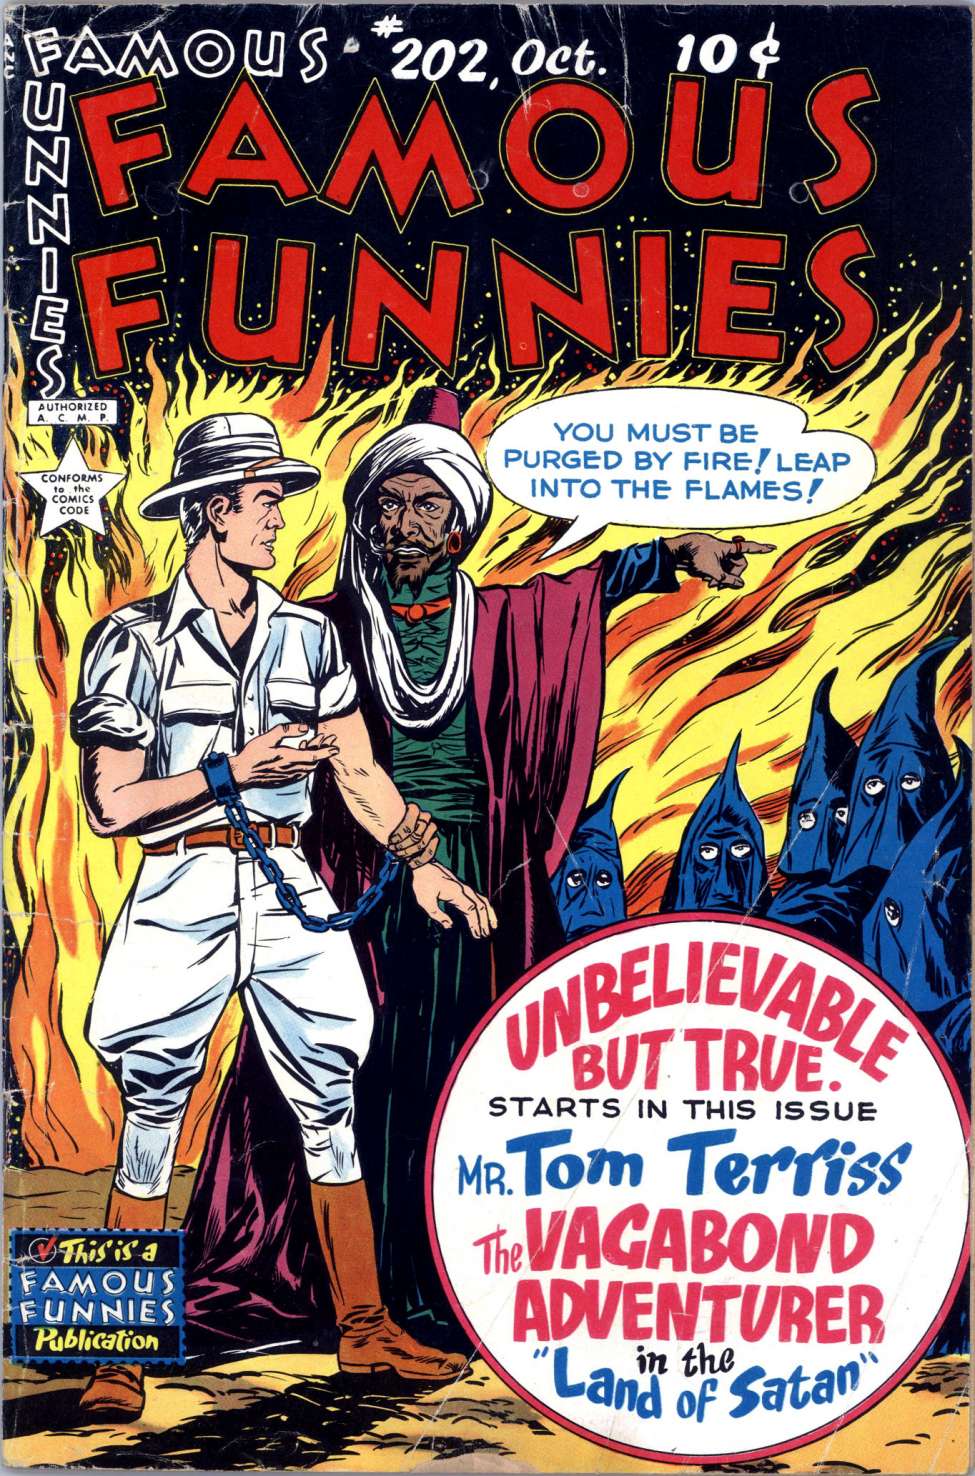 Book Cover For Famous Funnies 202